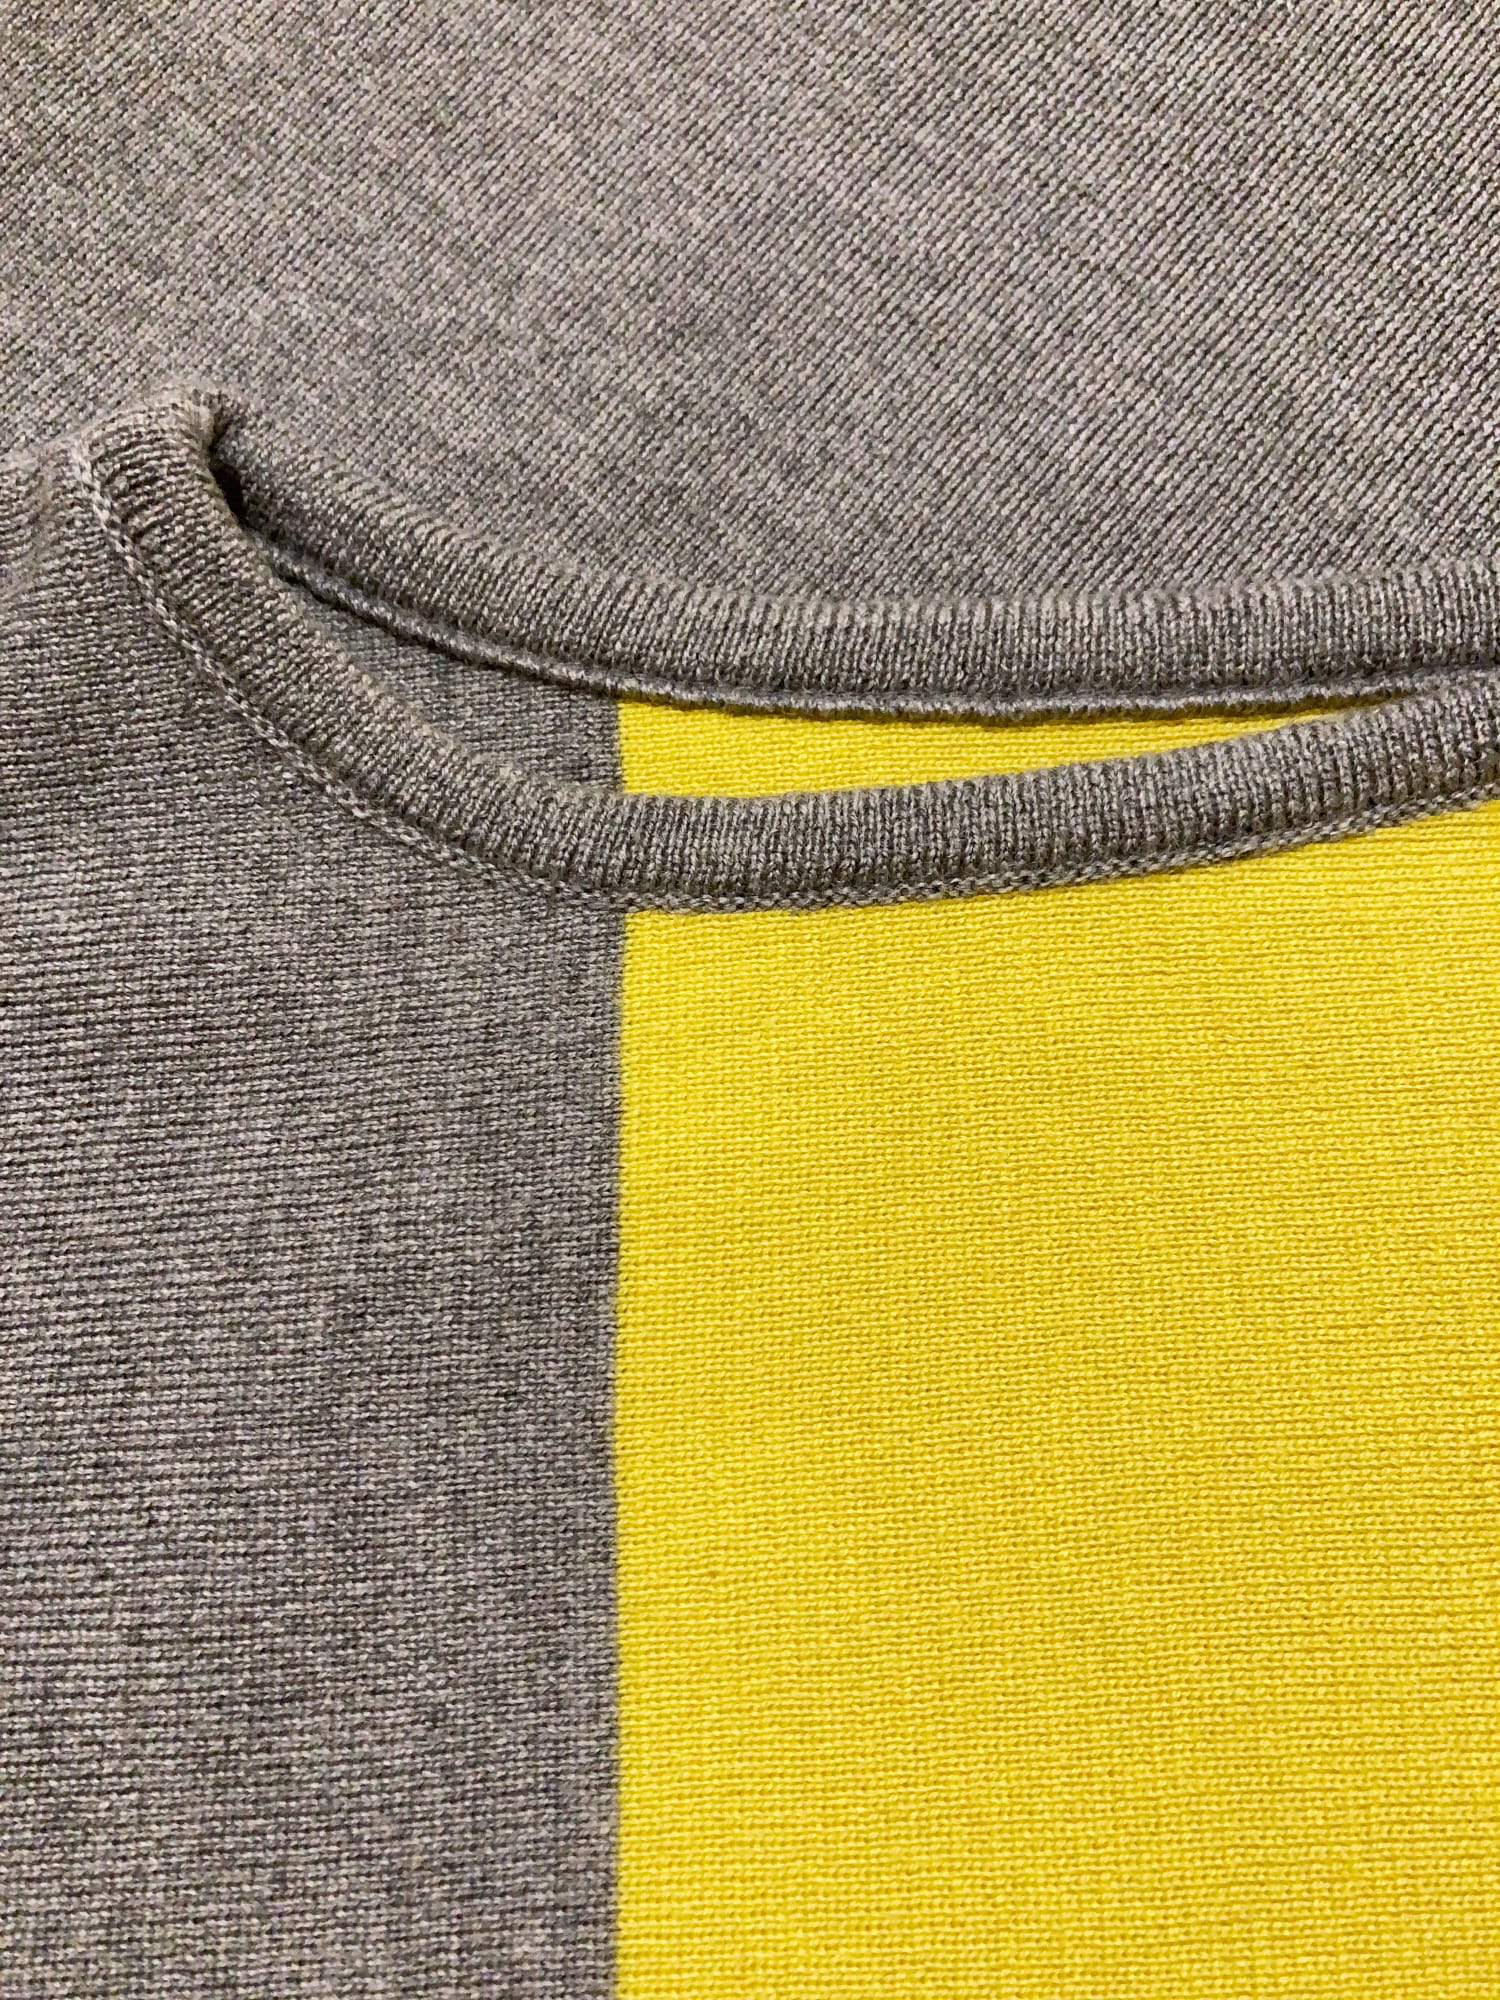 Sarah Corynen yellow and grey knitted wool vest